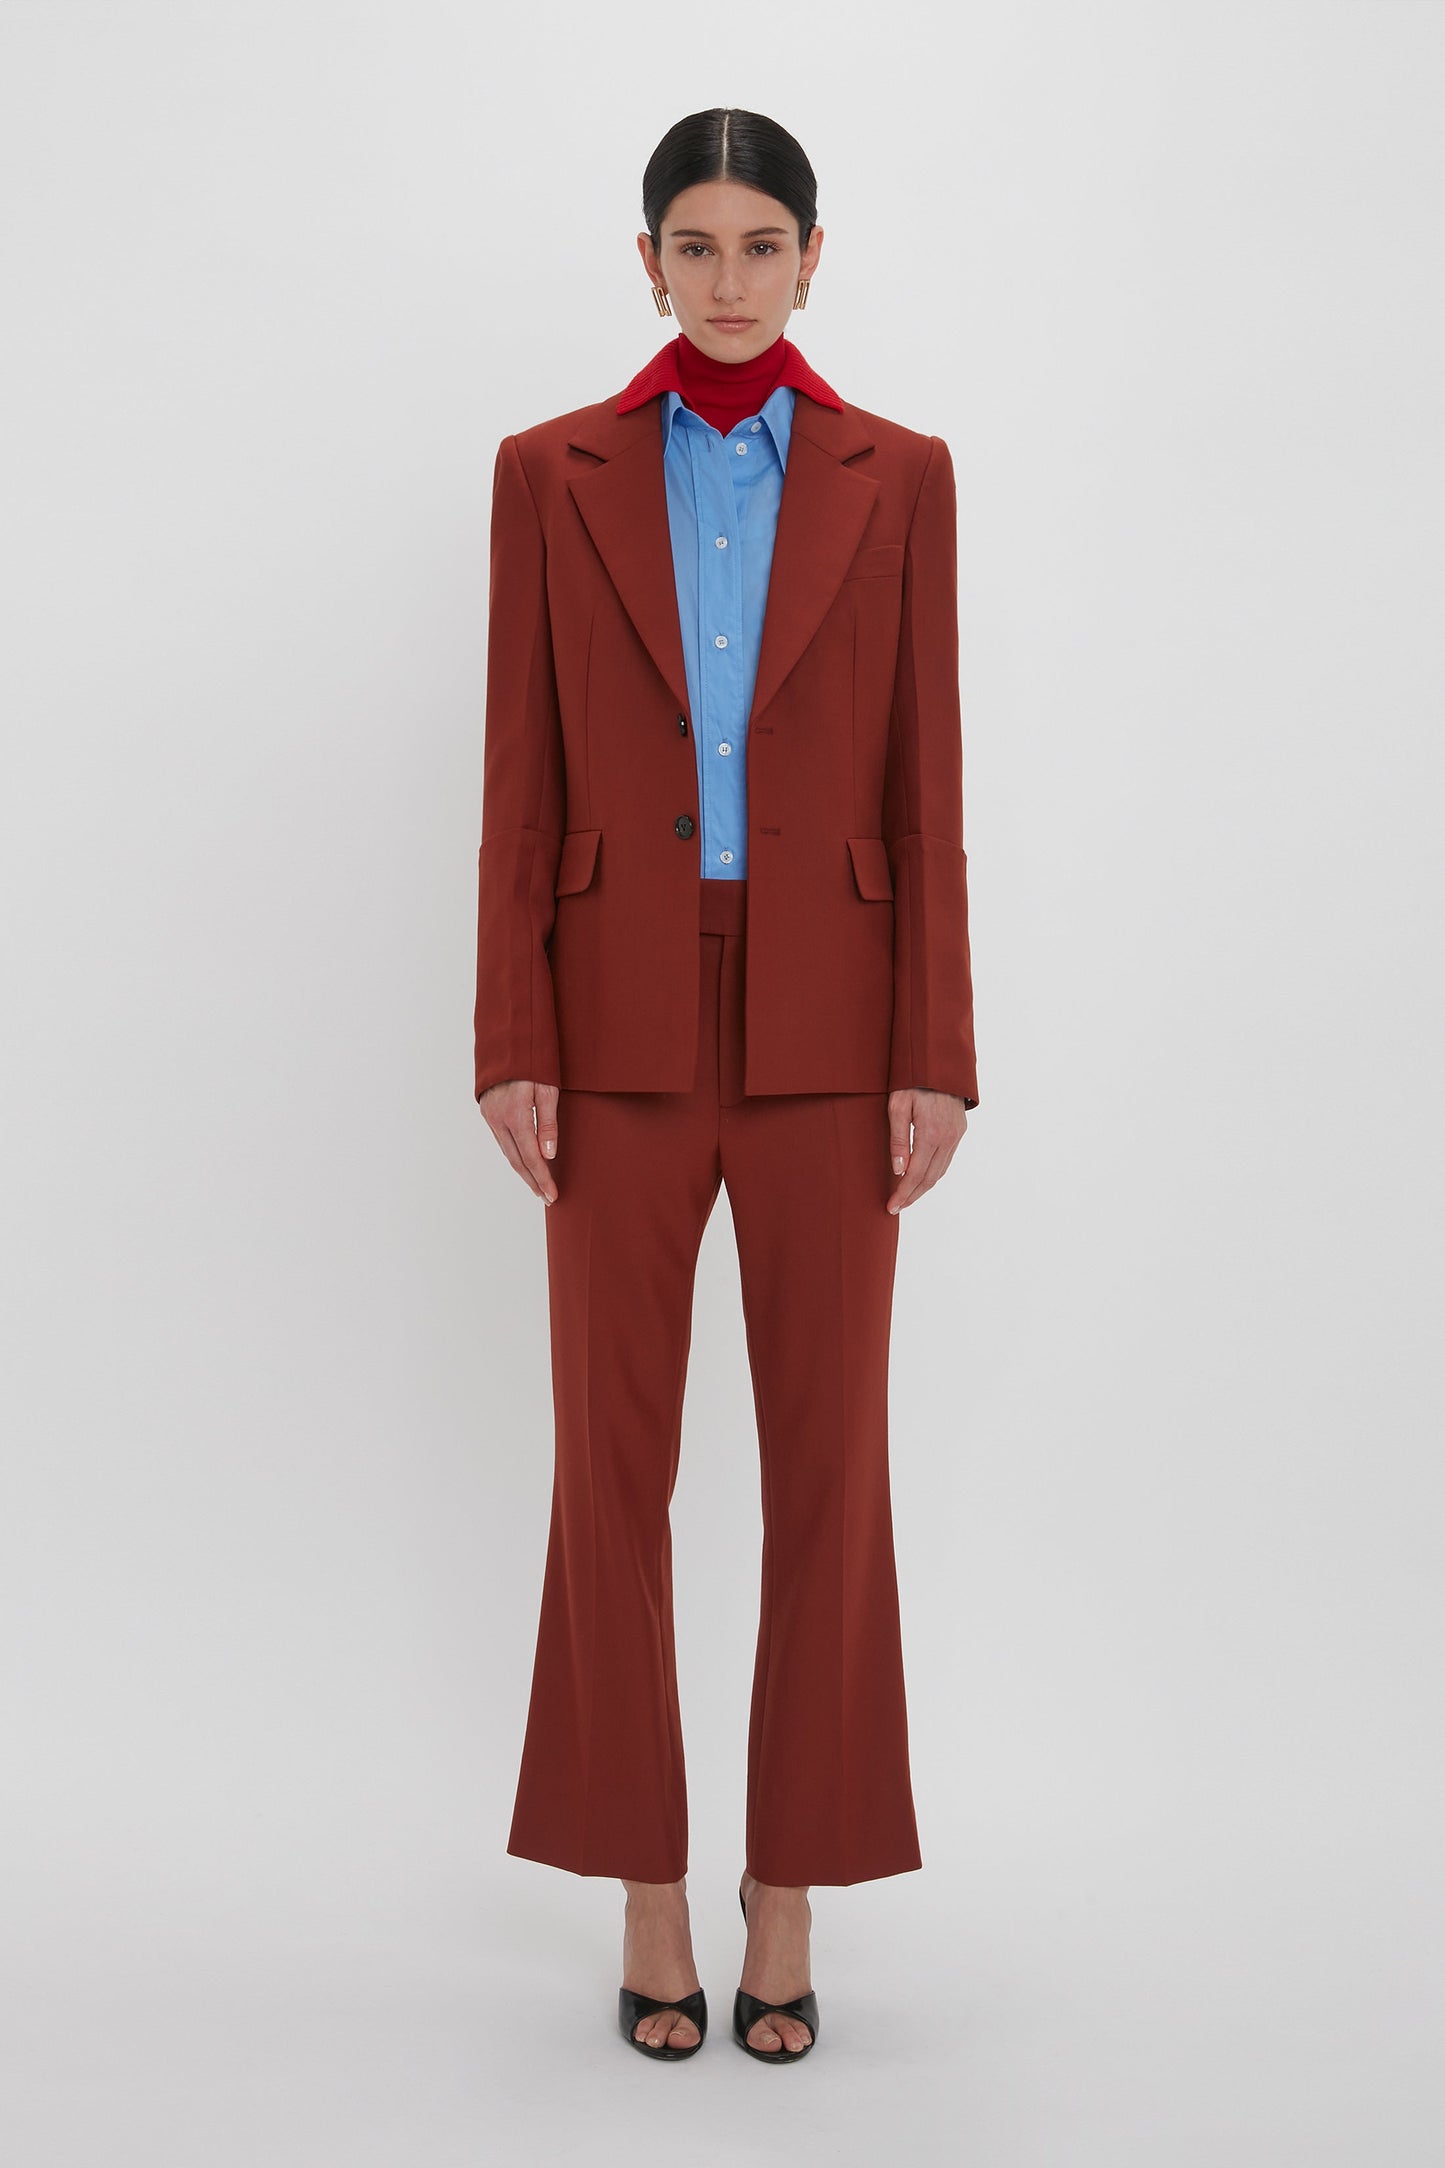 A person stands against a plain white background, wearing a rust-colored suit over a light blue button-up shirt and Wide Cropped Flare Trouser In Russet by Victoria Beckham, complemented by a red scarf around the neck and black open-toe heels.